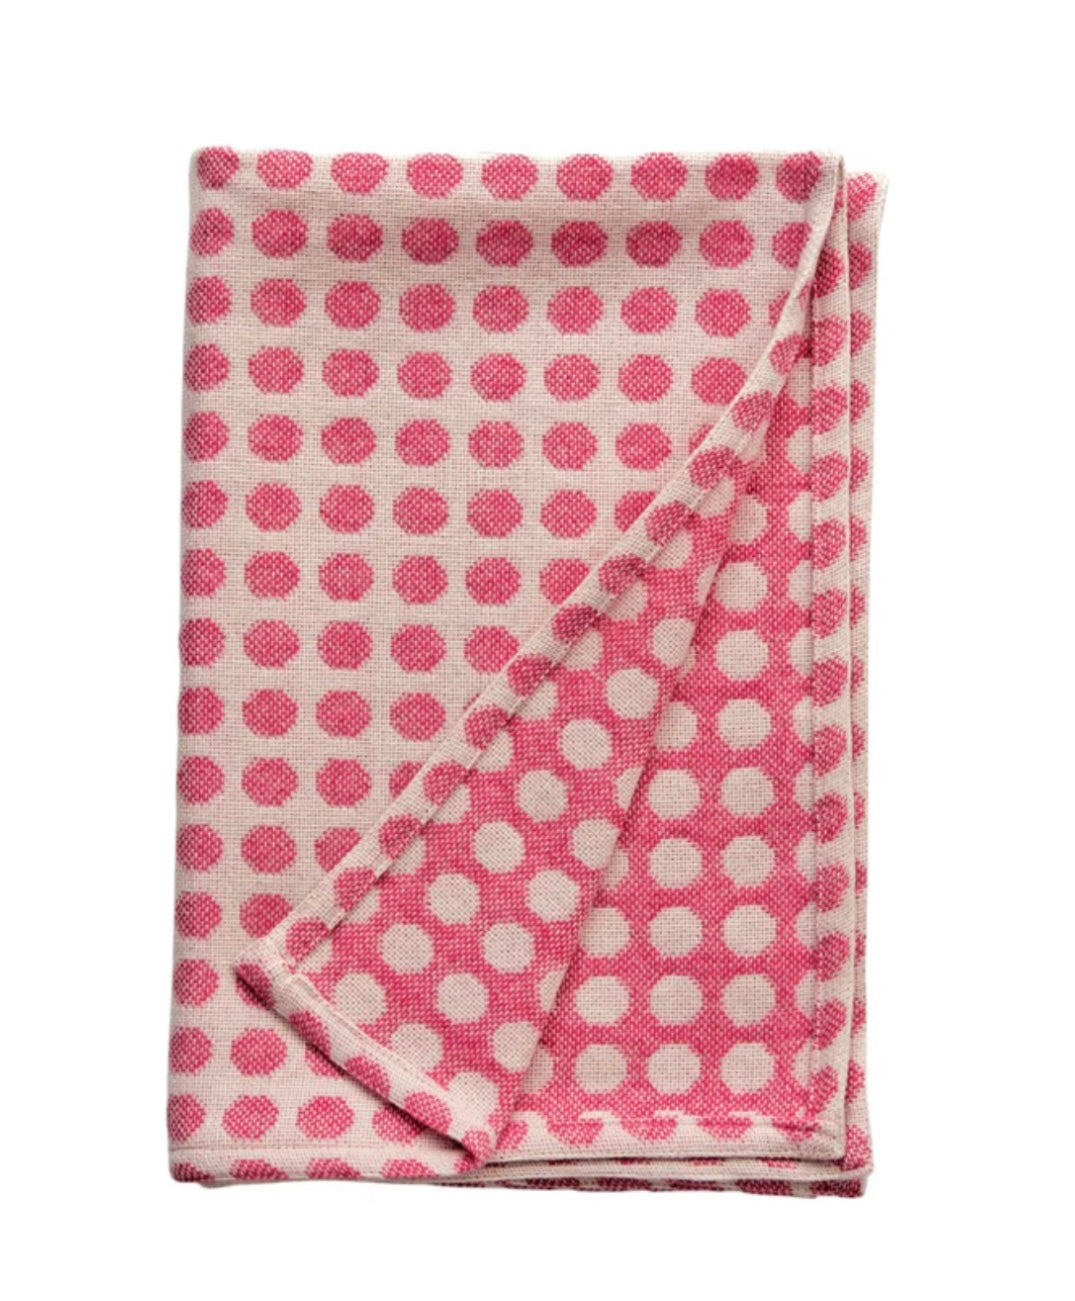 Spotted Welsh Throw - Pink